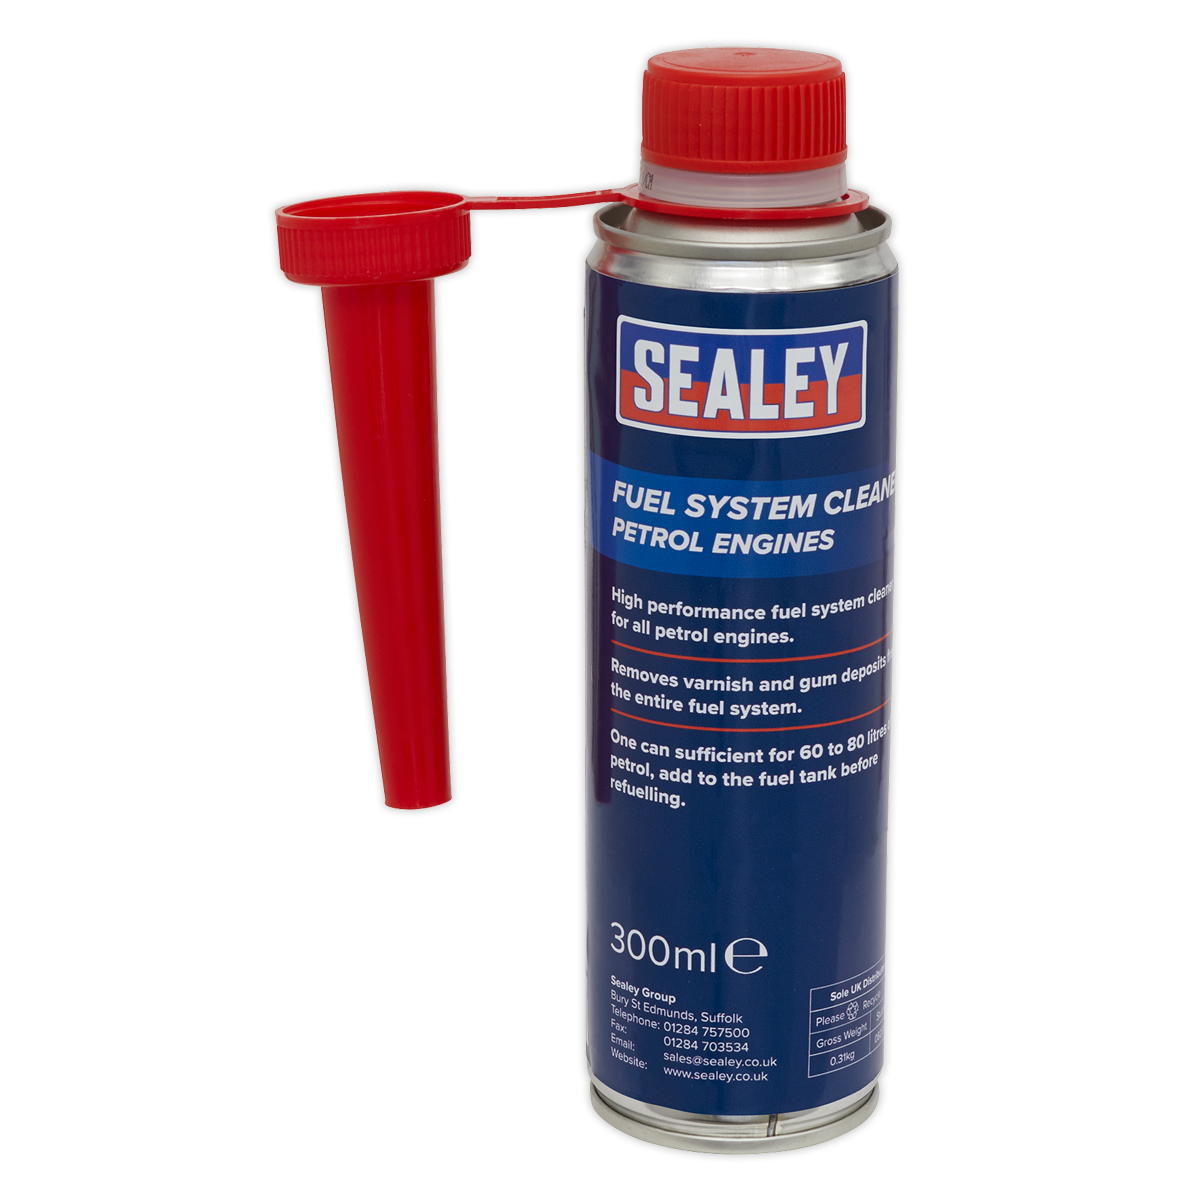 Fuel System Cleaner 300ml - Petrol Engines - FSCP300 - Farming Parts